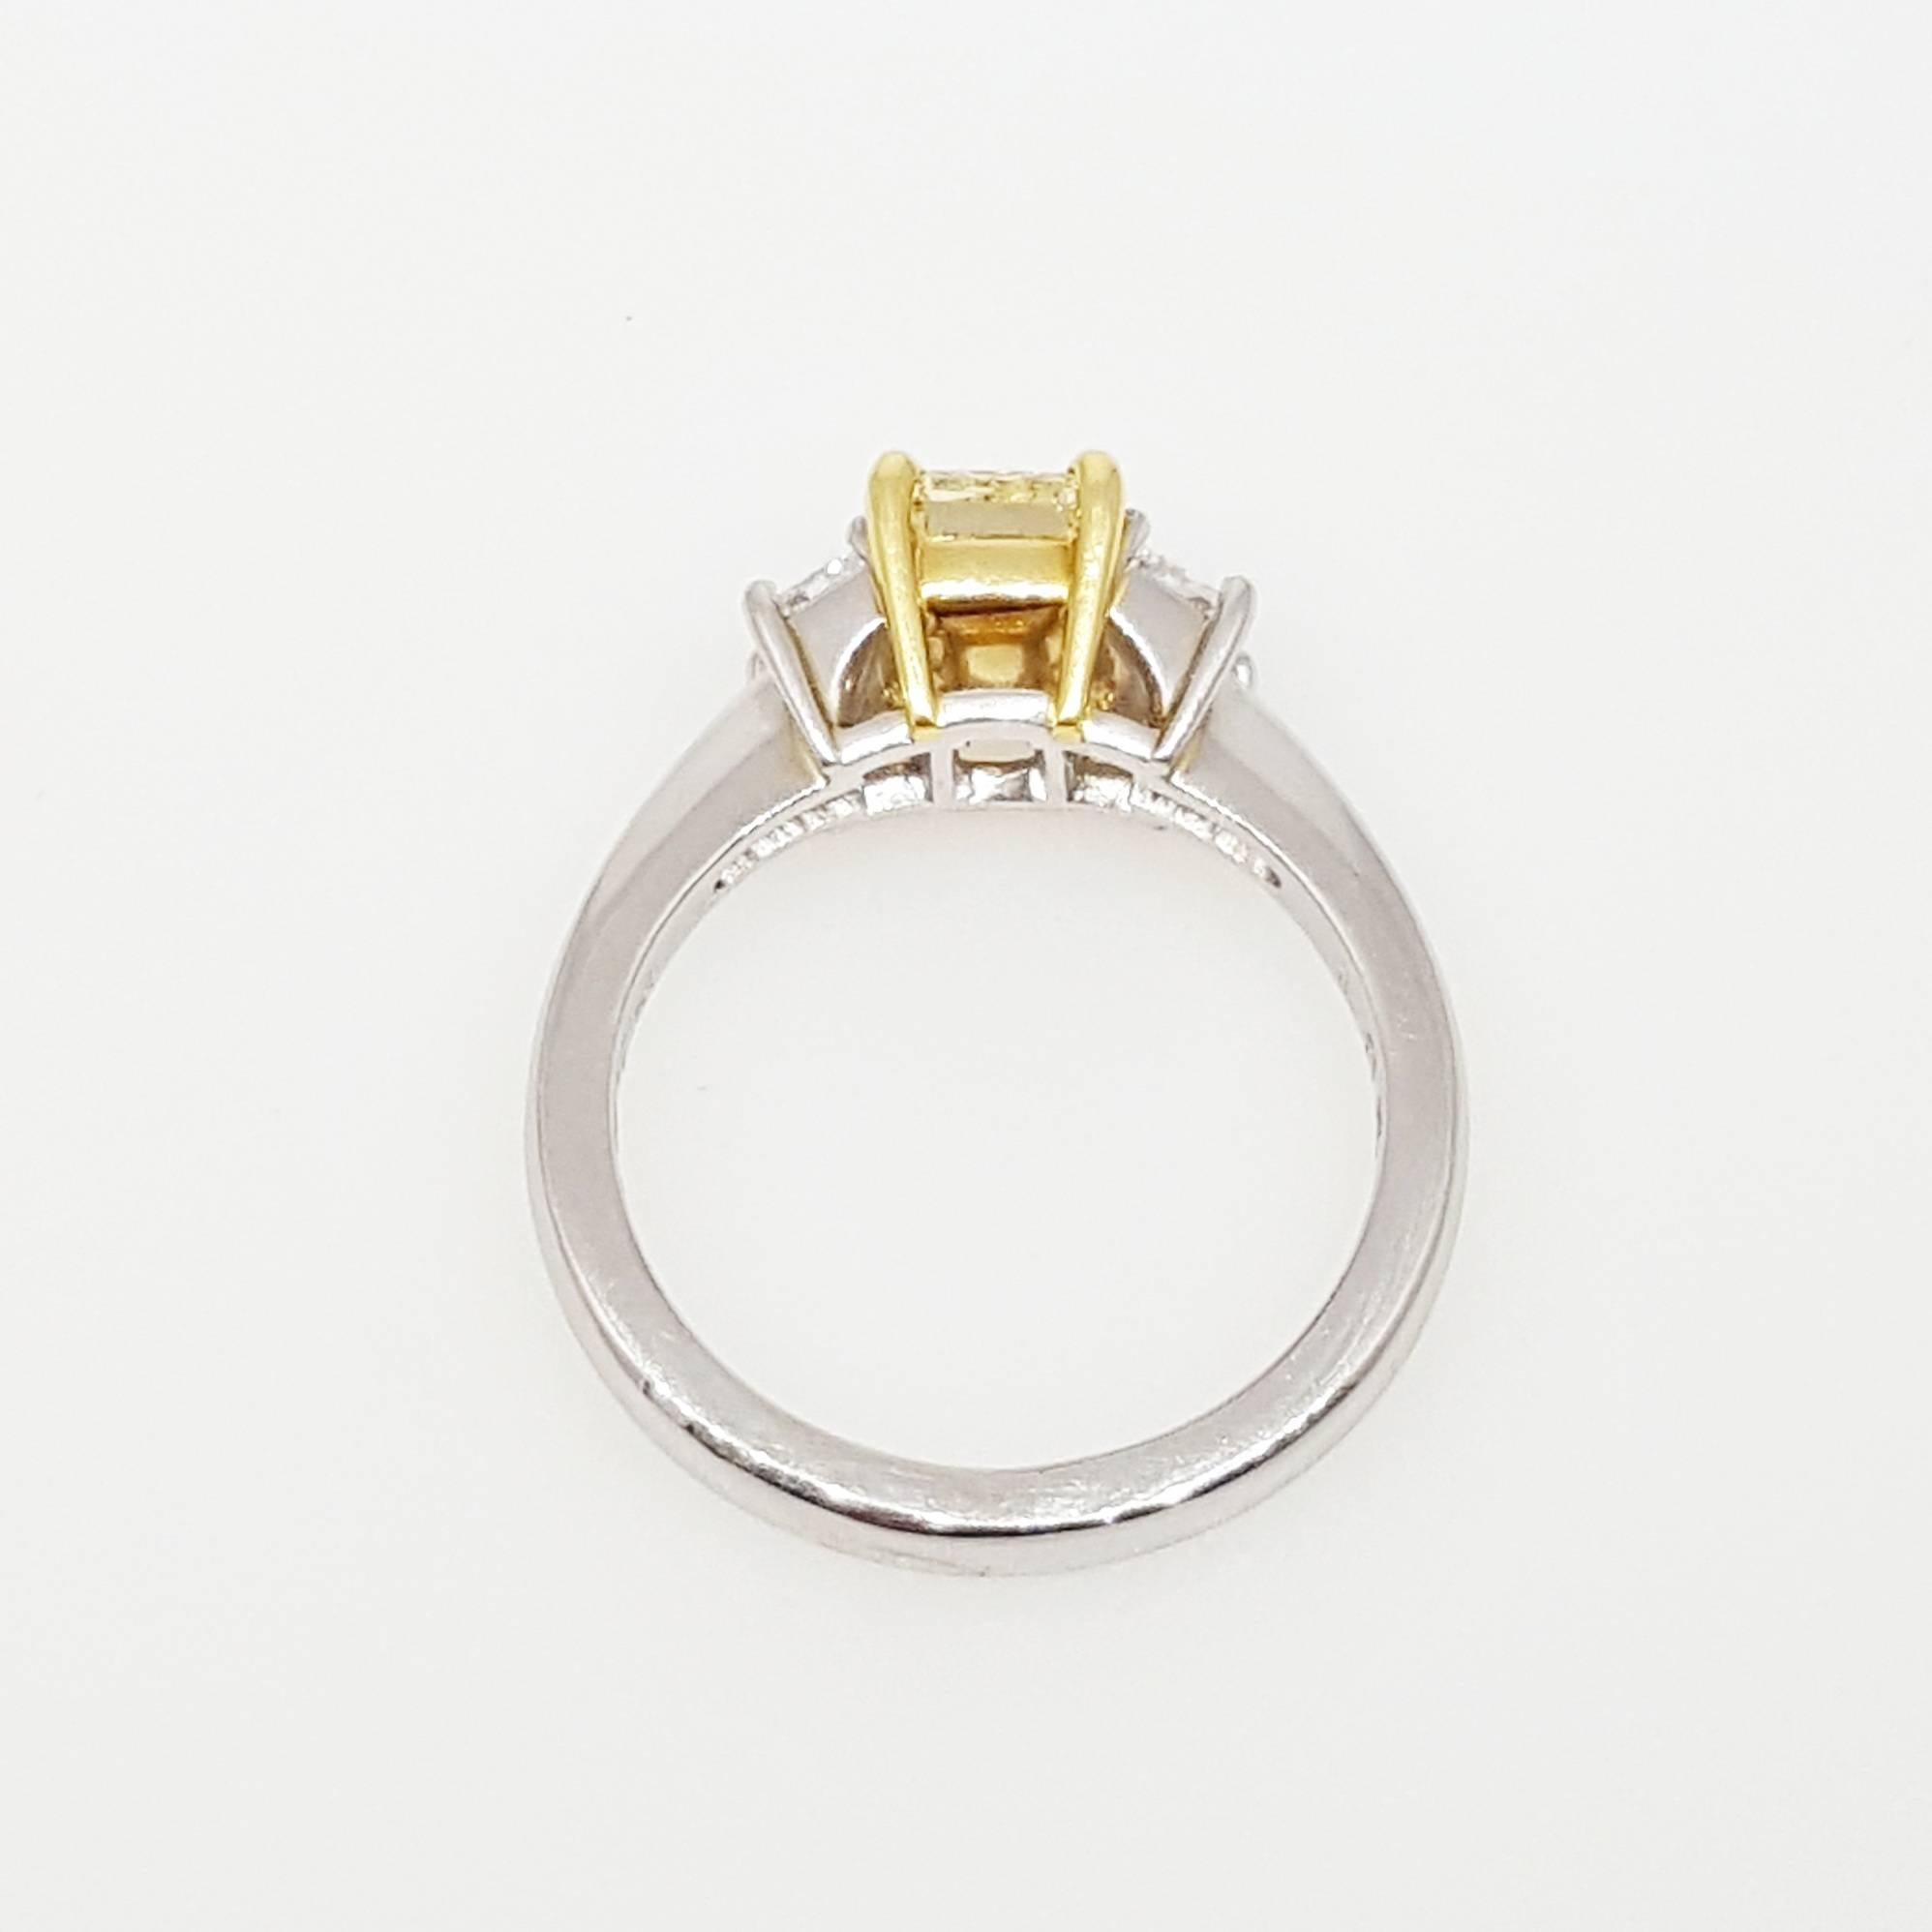 Platinum and 18 karat yellow gold ring set with a 1.51 carat Fancy Light Yellow VS1 Clarity (GIA certified) Cut-Cornered Rectangular Modified Brilliant diamond in the center and two white trapezoid cut diamonds on the side that weigh 0.66cttw and